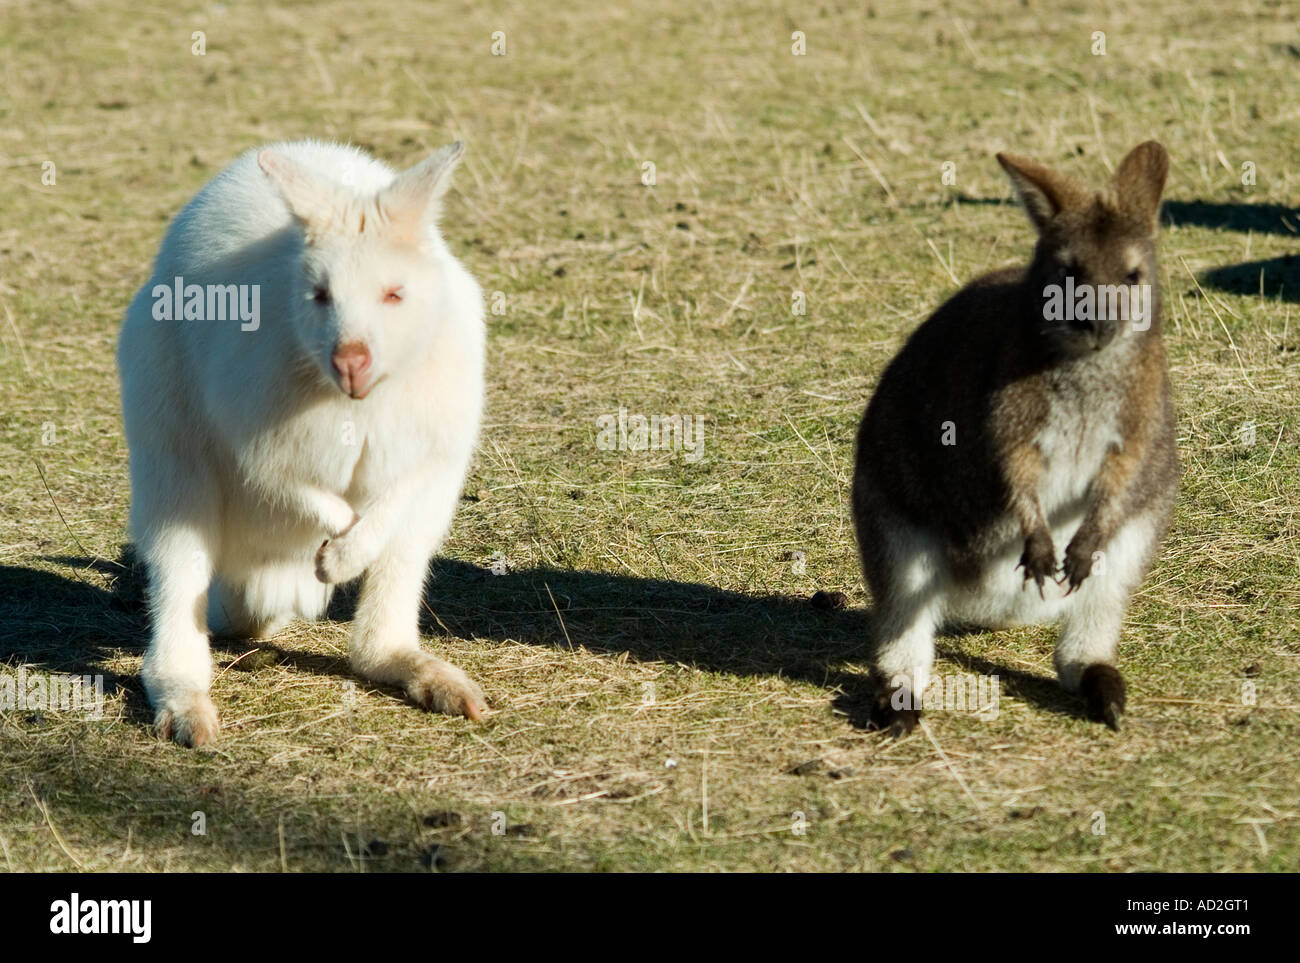 Two Tasmanian wallabies one albino type compared with natural colouring Stock Photo